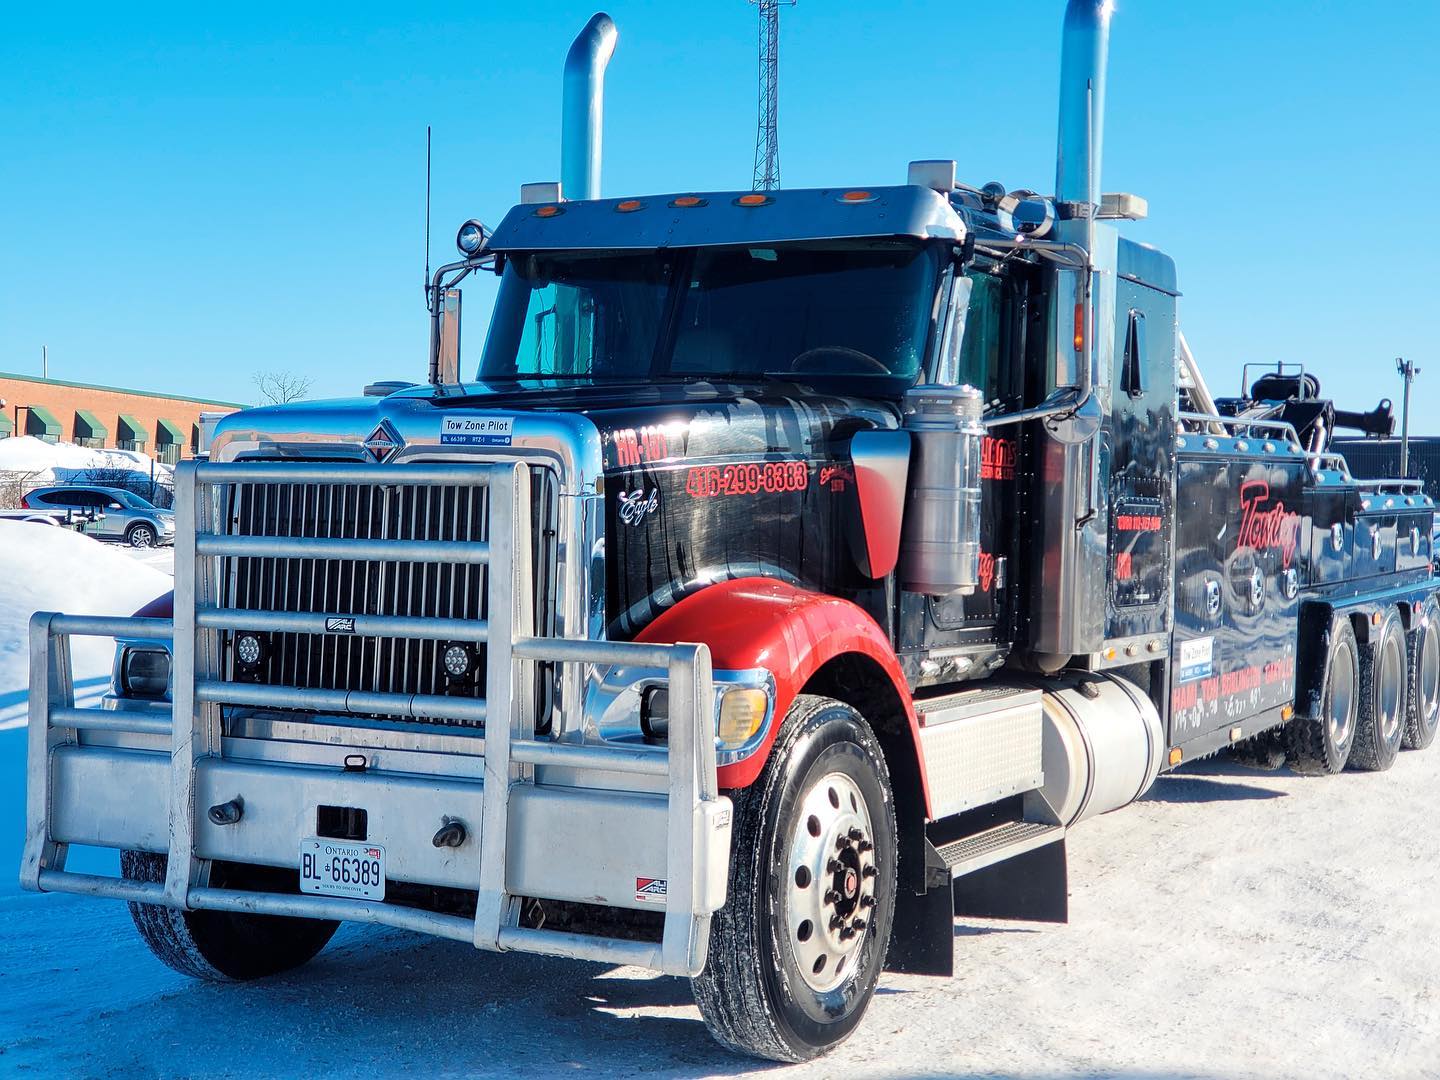 Williams Towing - Long Distance Towing in Toronto | Williams Towing